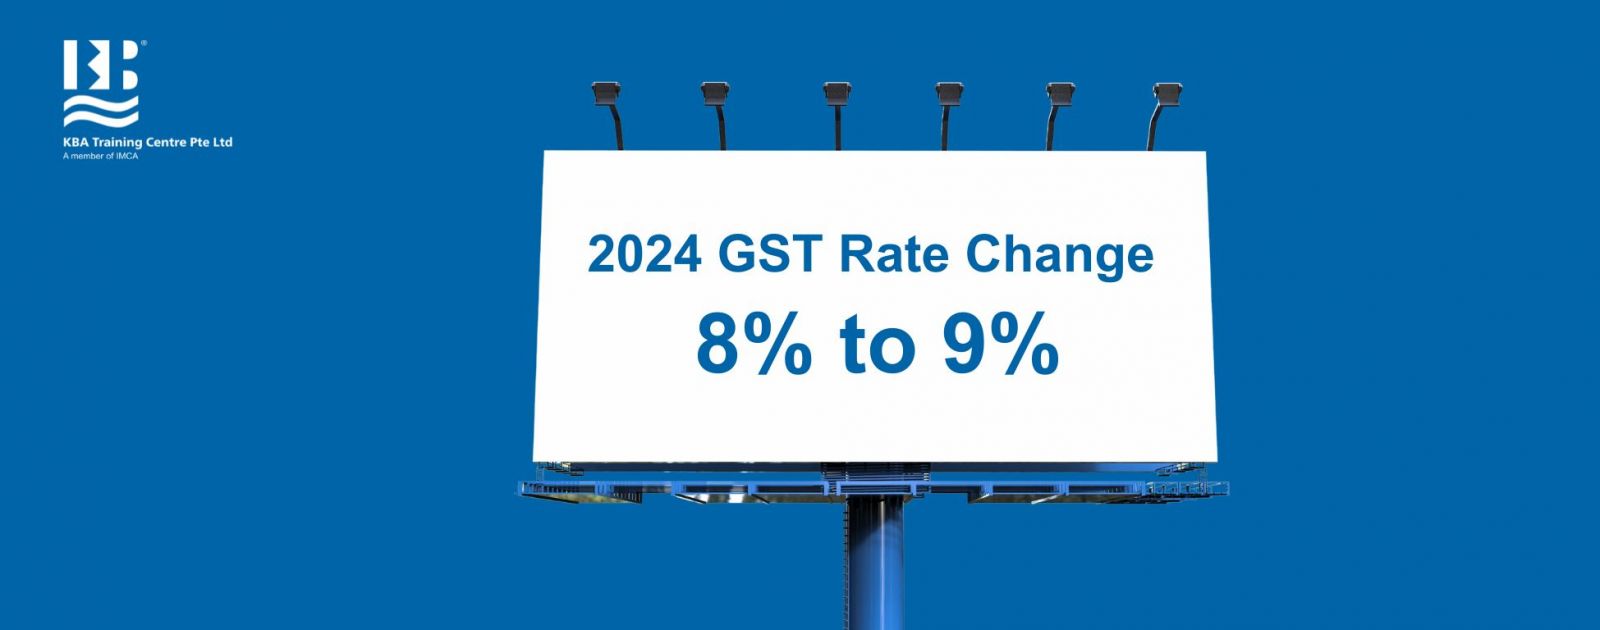 Singapore GST increase from 8% to 9%